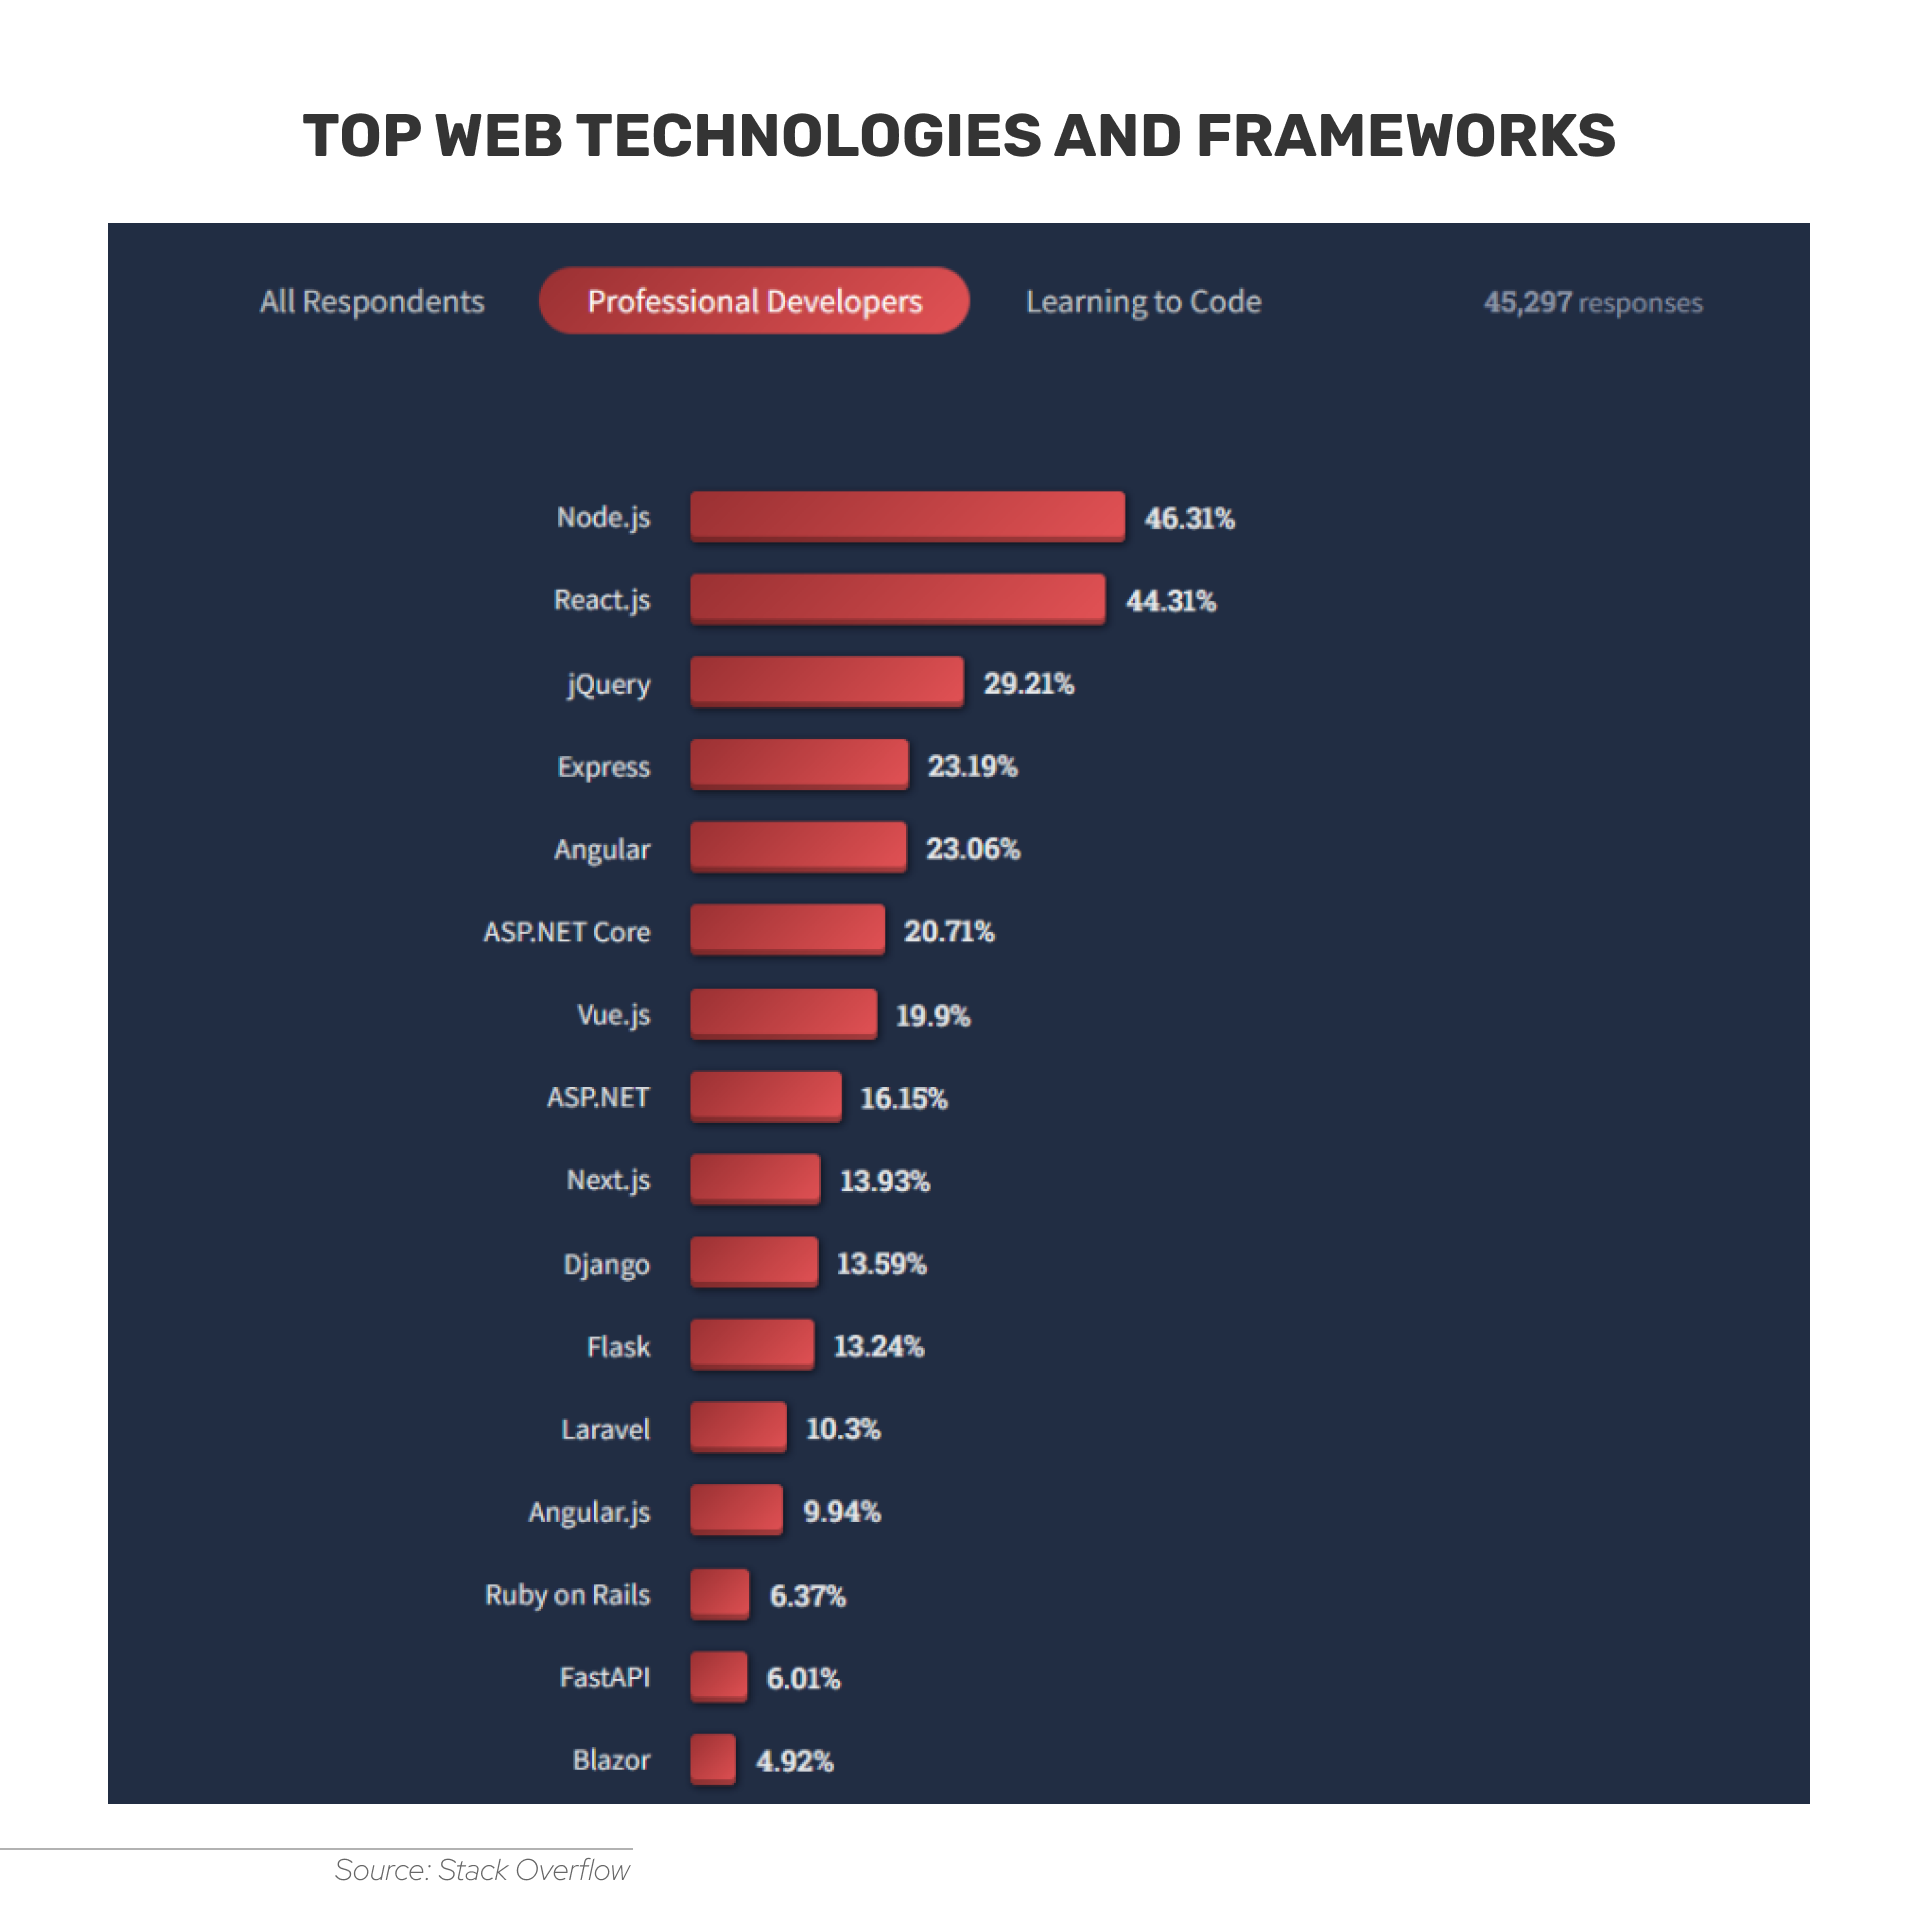 Stack Overflow states that Node.js and React.js are the most popular web technologies used by professional developers.